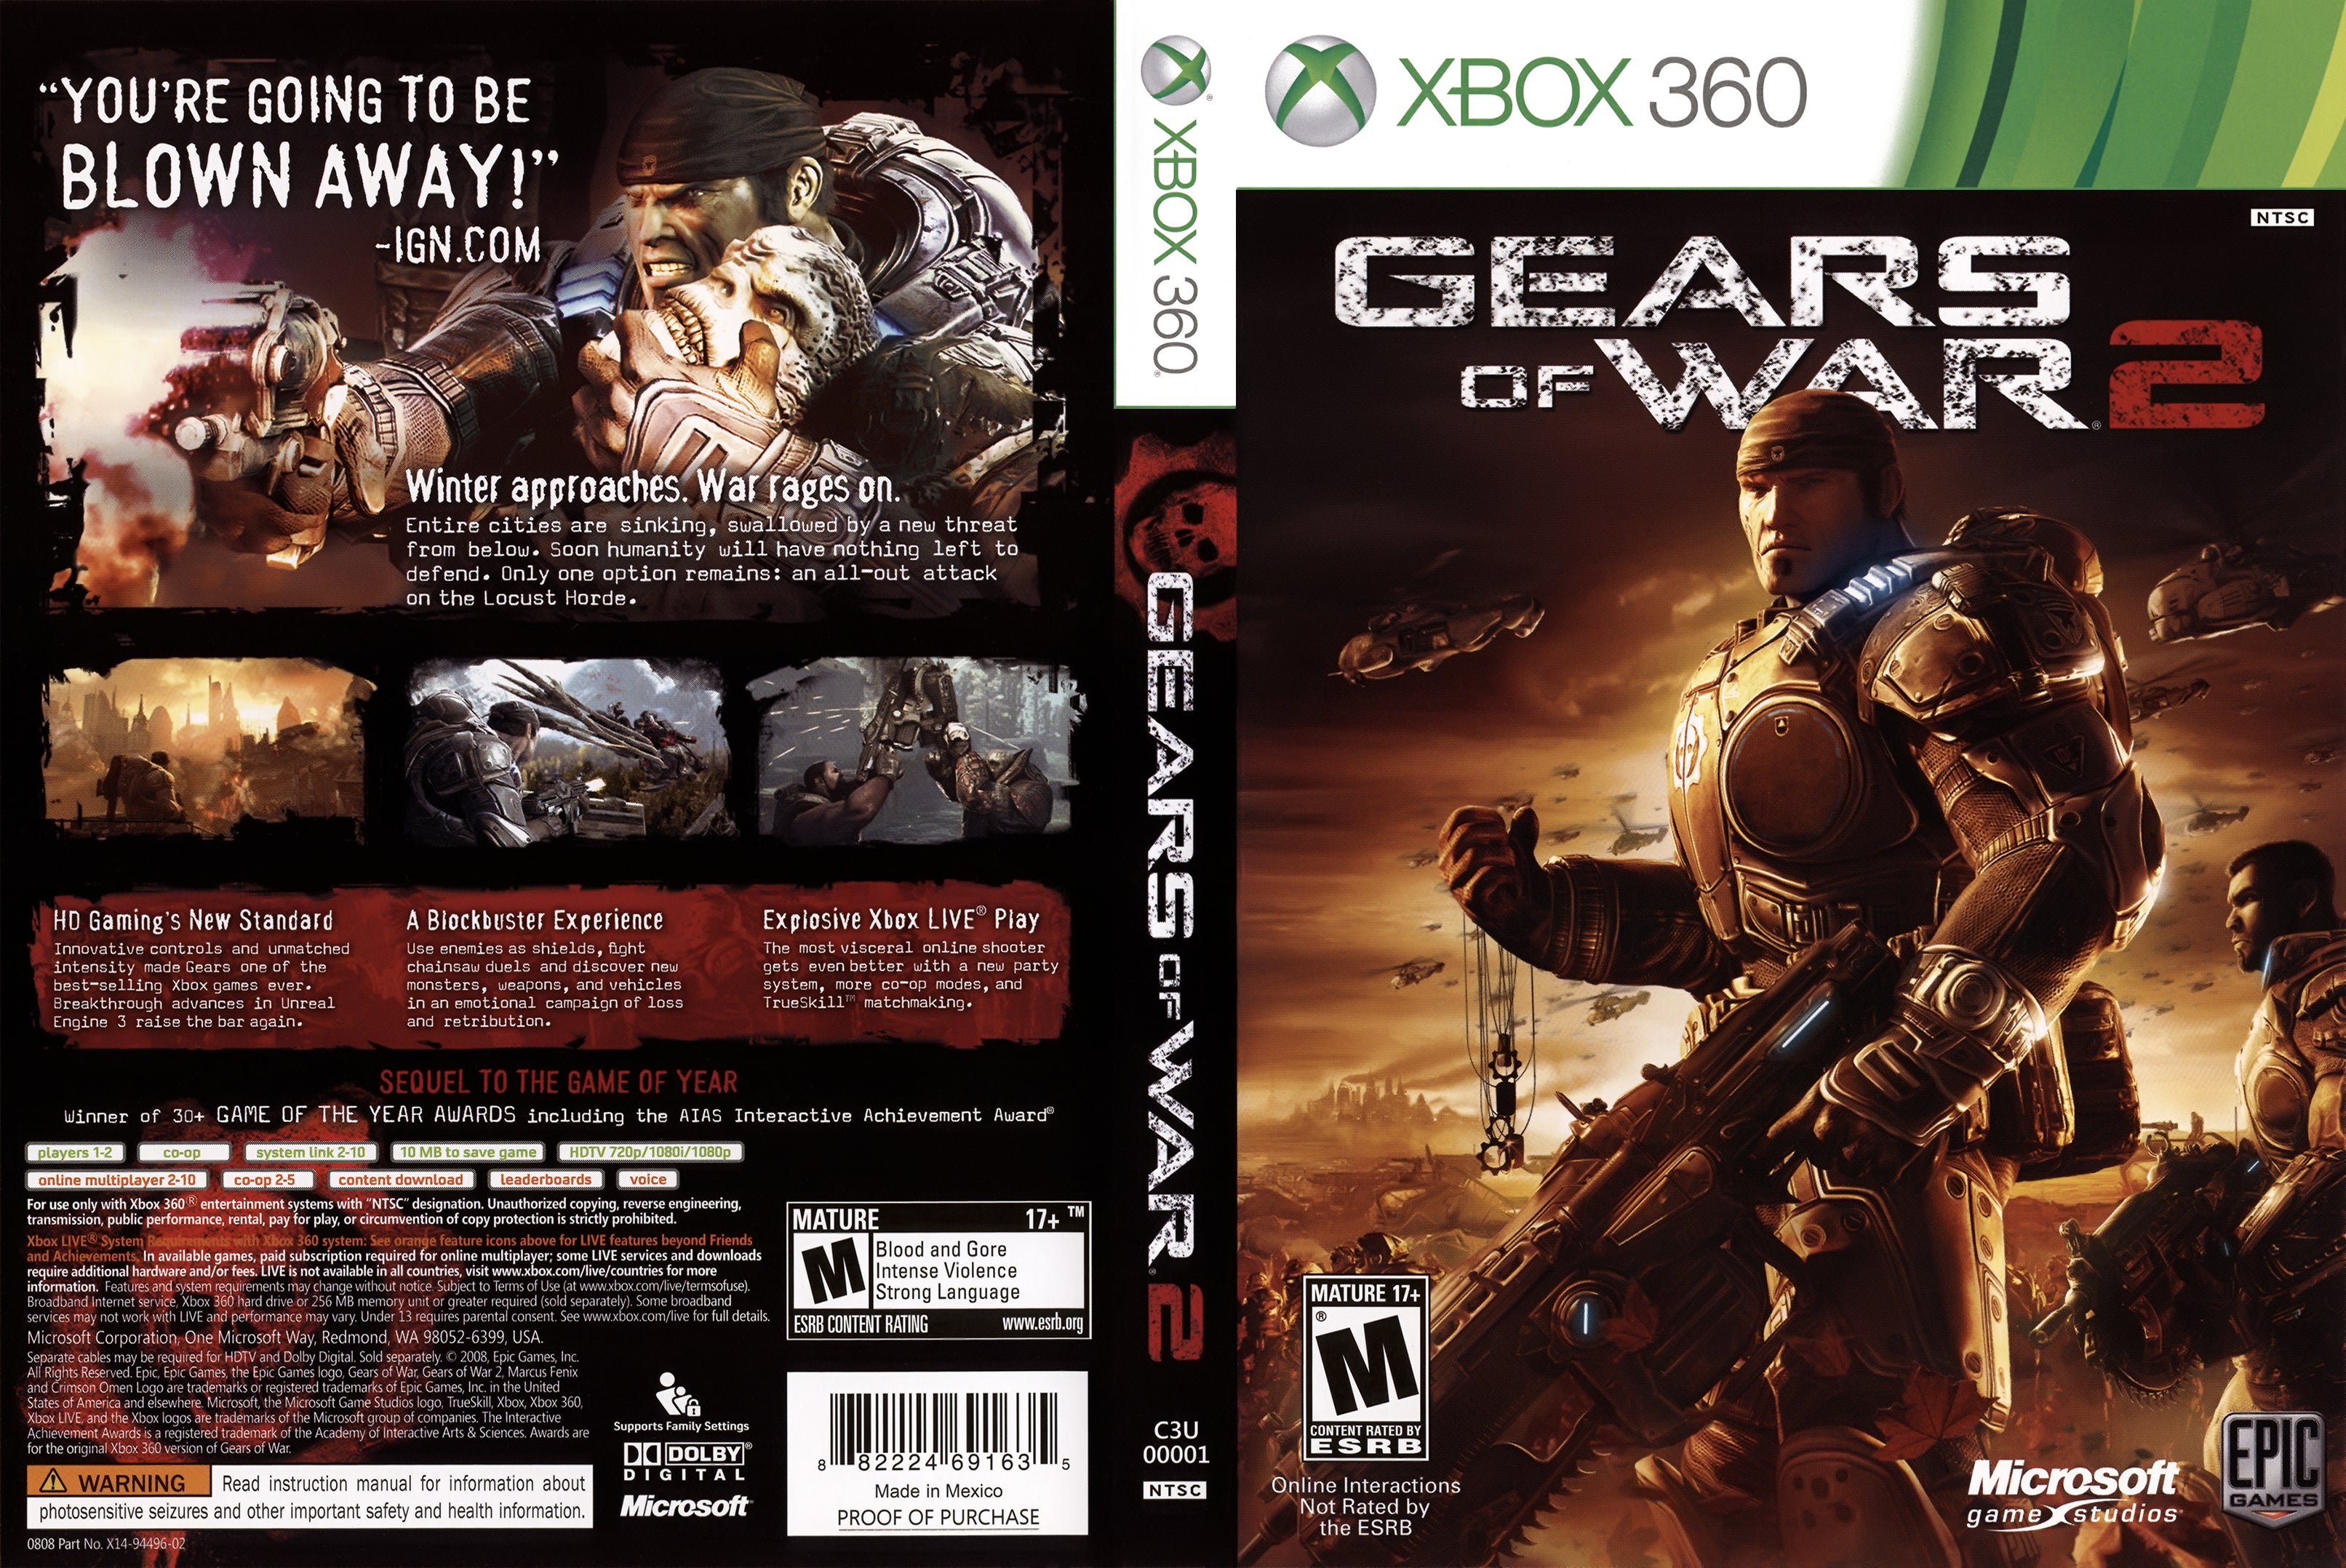 Buy Xbox 360 Gears of War 2 Game of the Year Edition